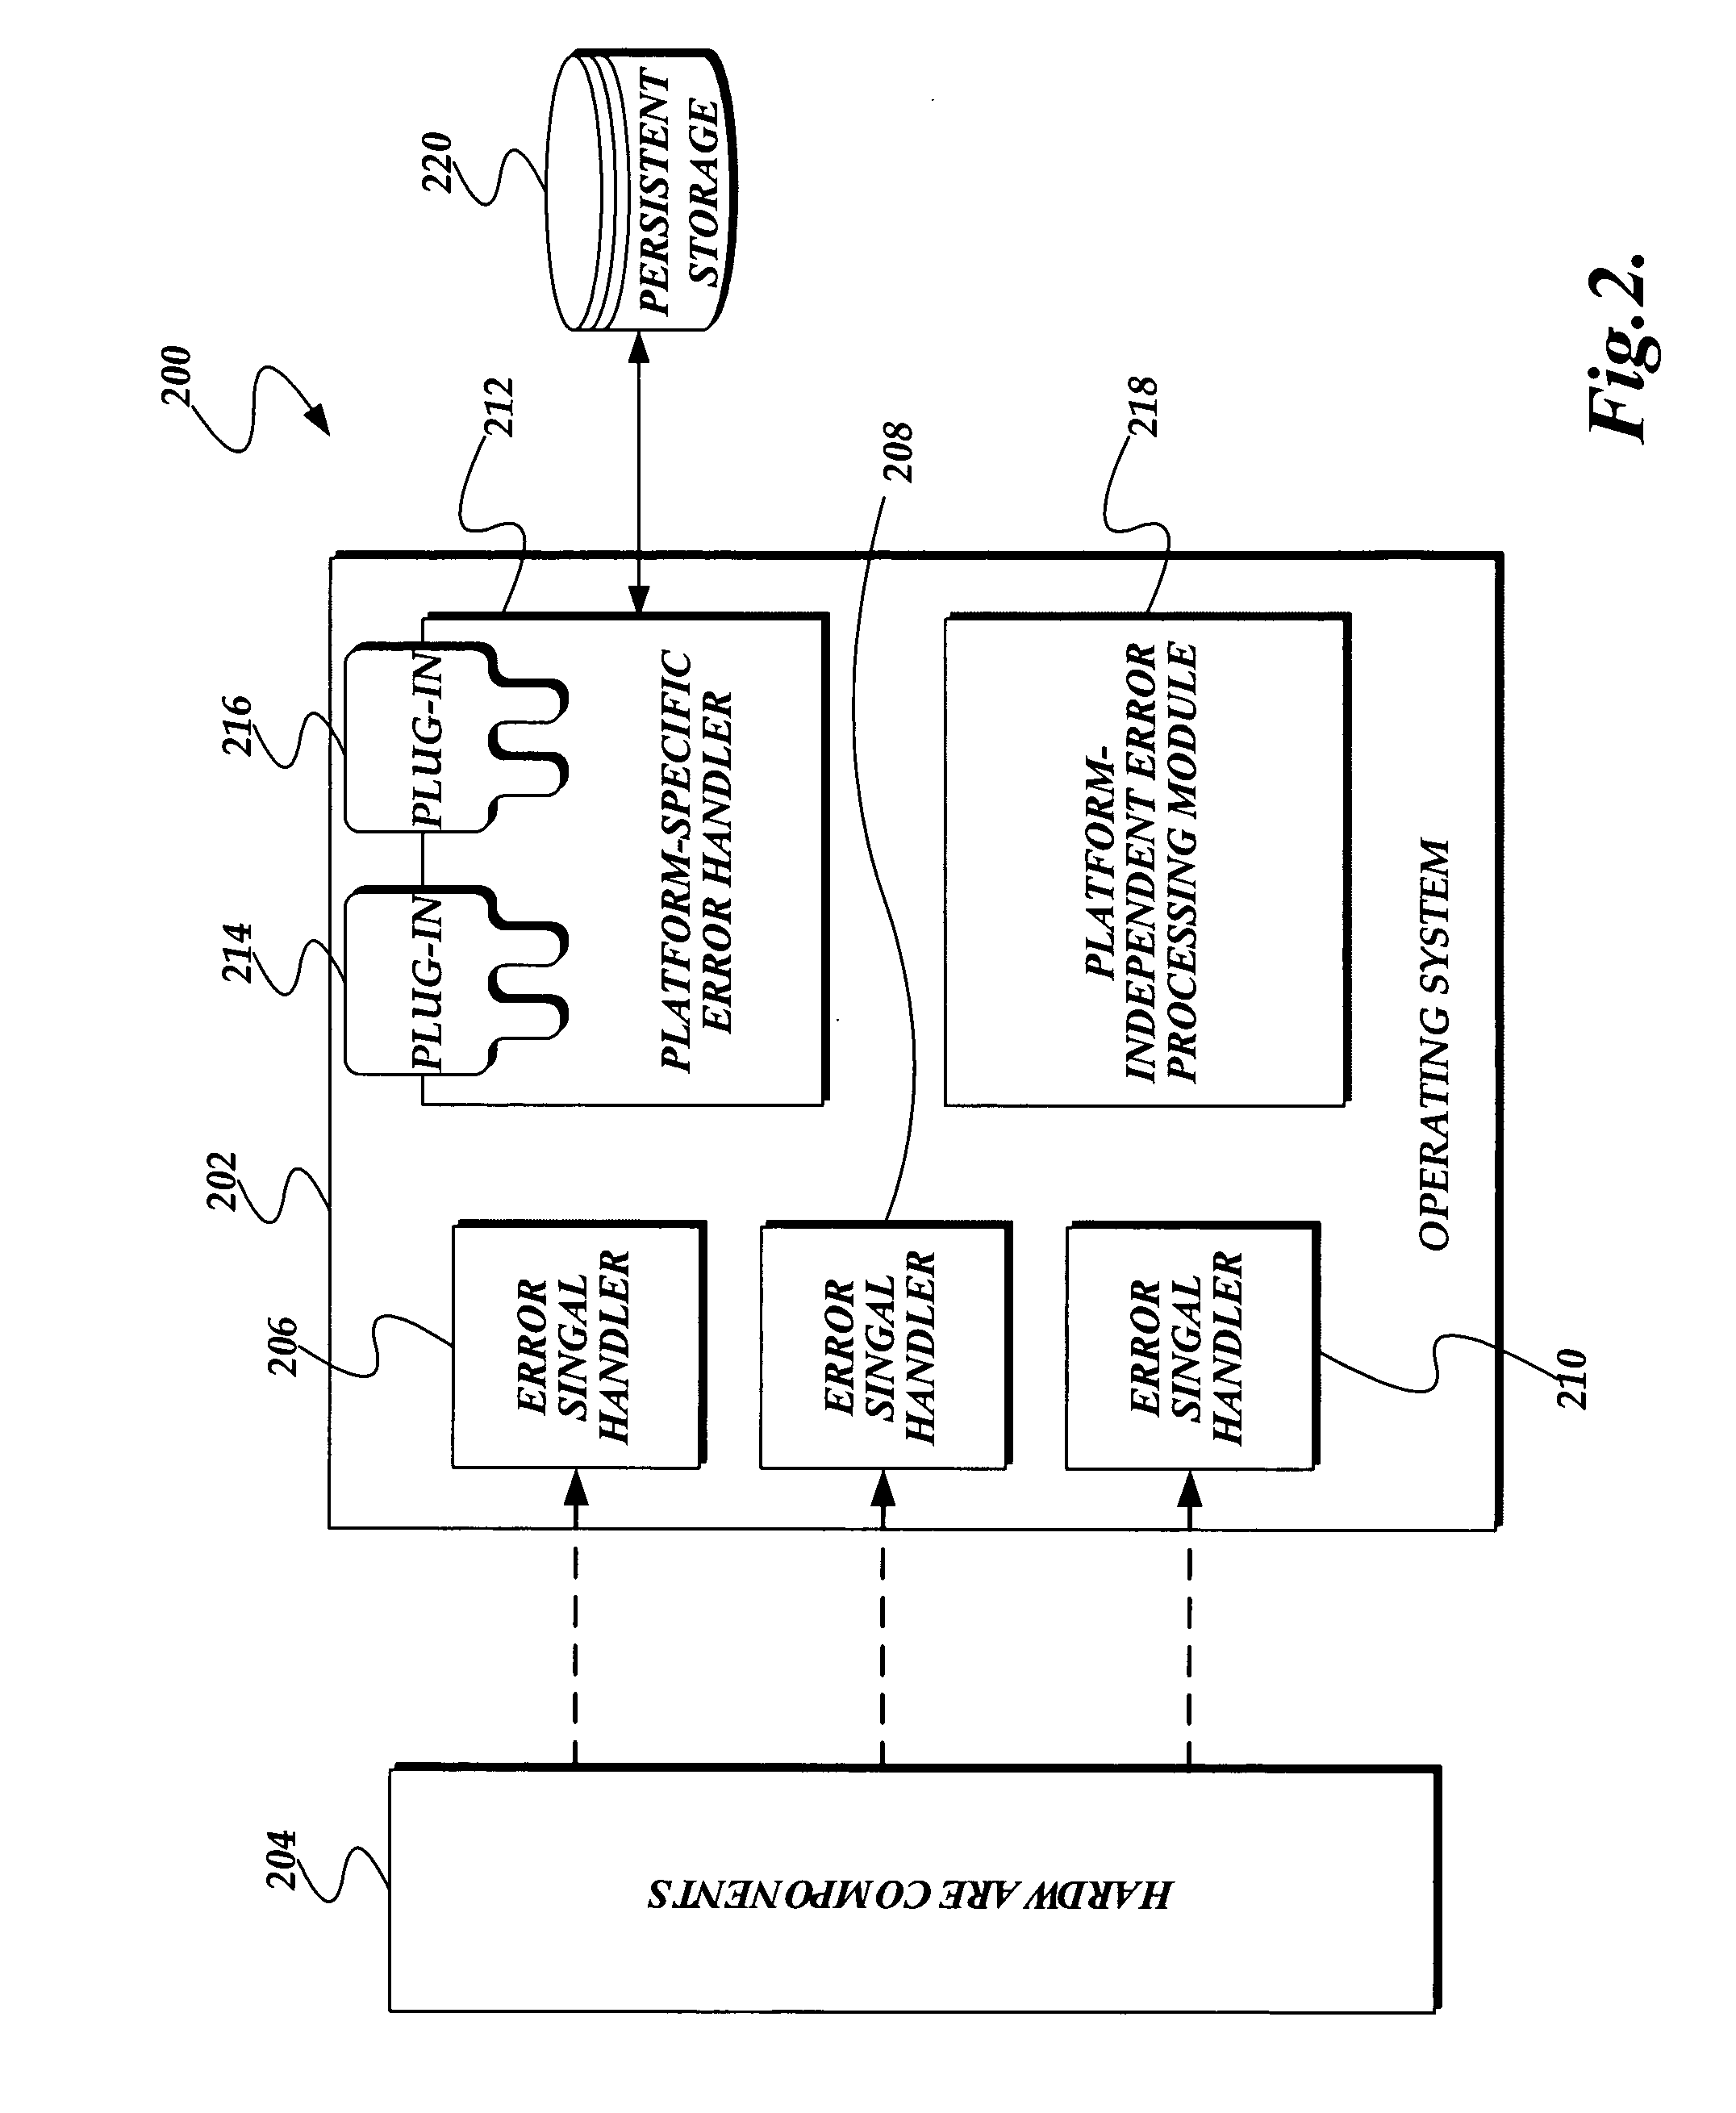 System and method for hardware error reporting and recovery